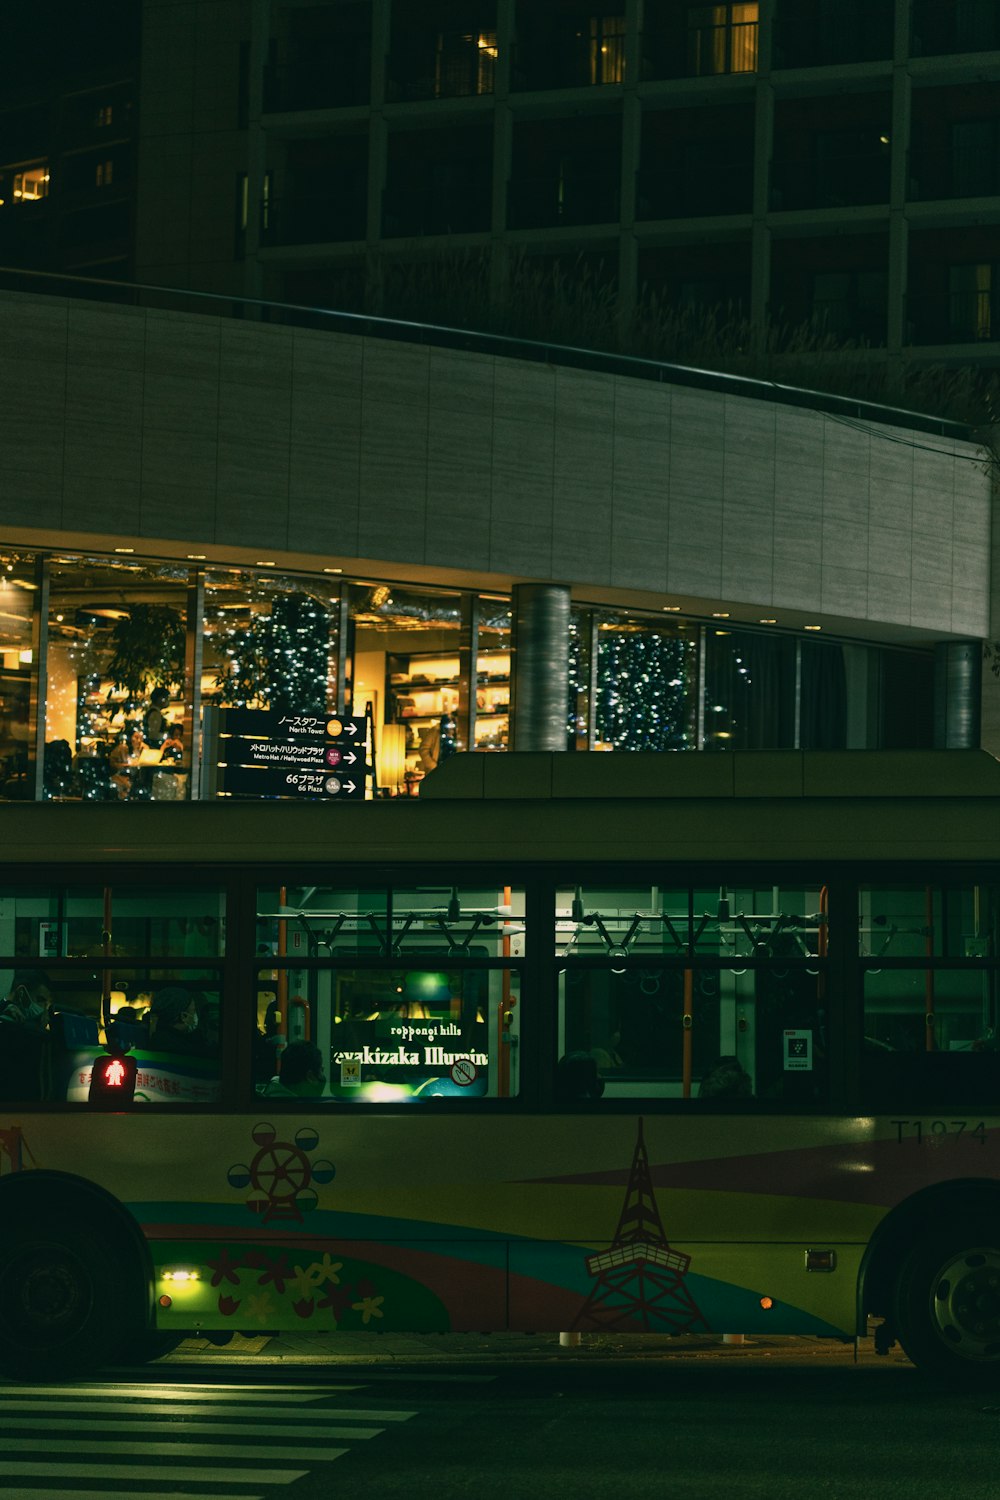 a bus parked in front of a building at night